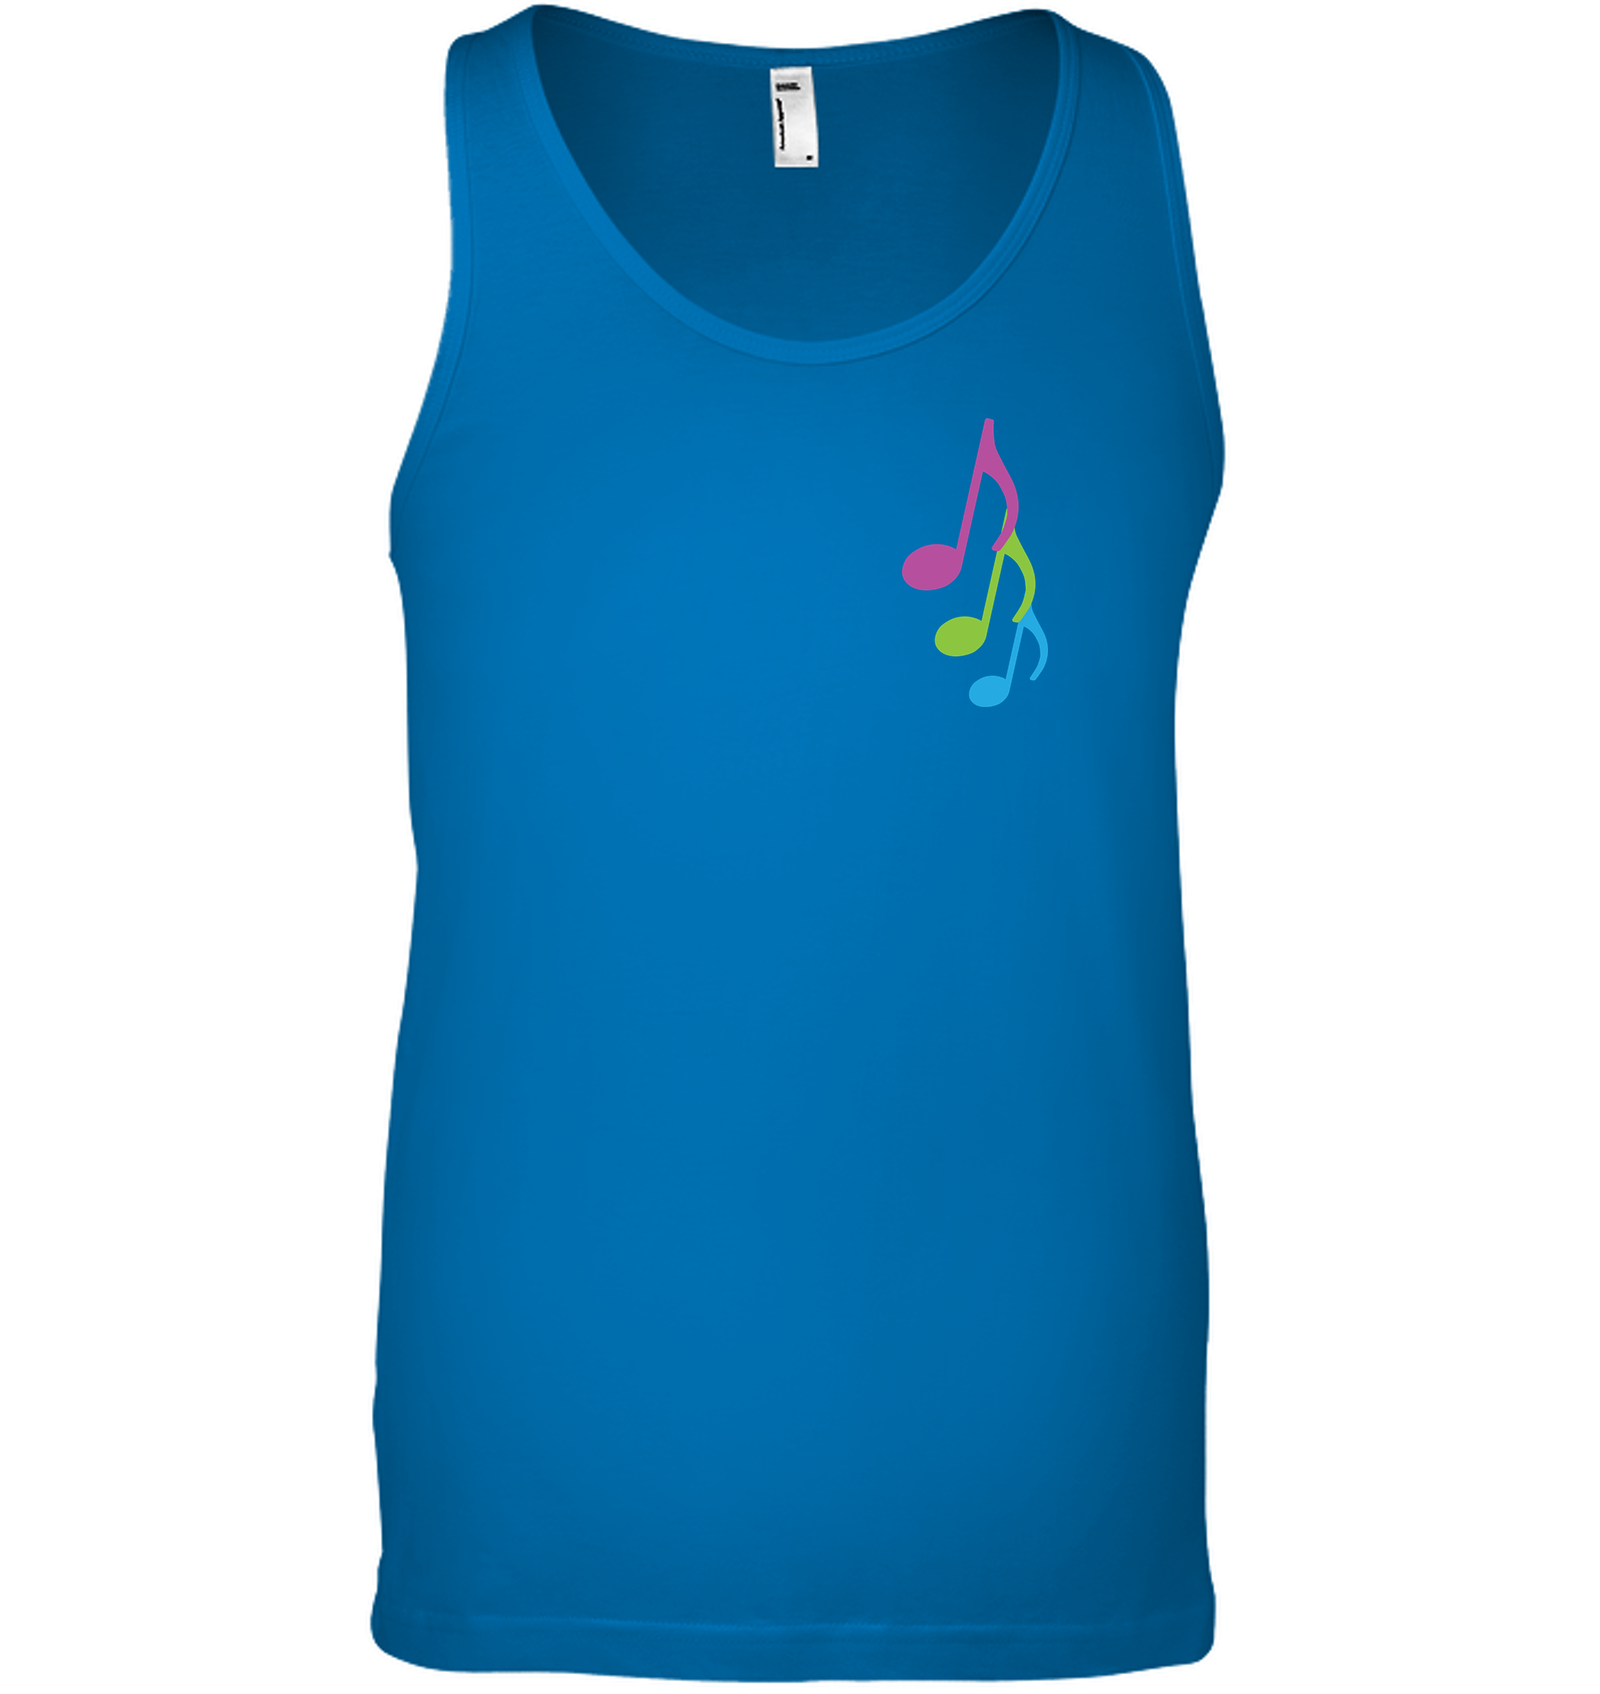 Three colorful musical notes (Pocket Size) - Bella + Canvas Unisex Jersey Tank